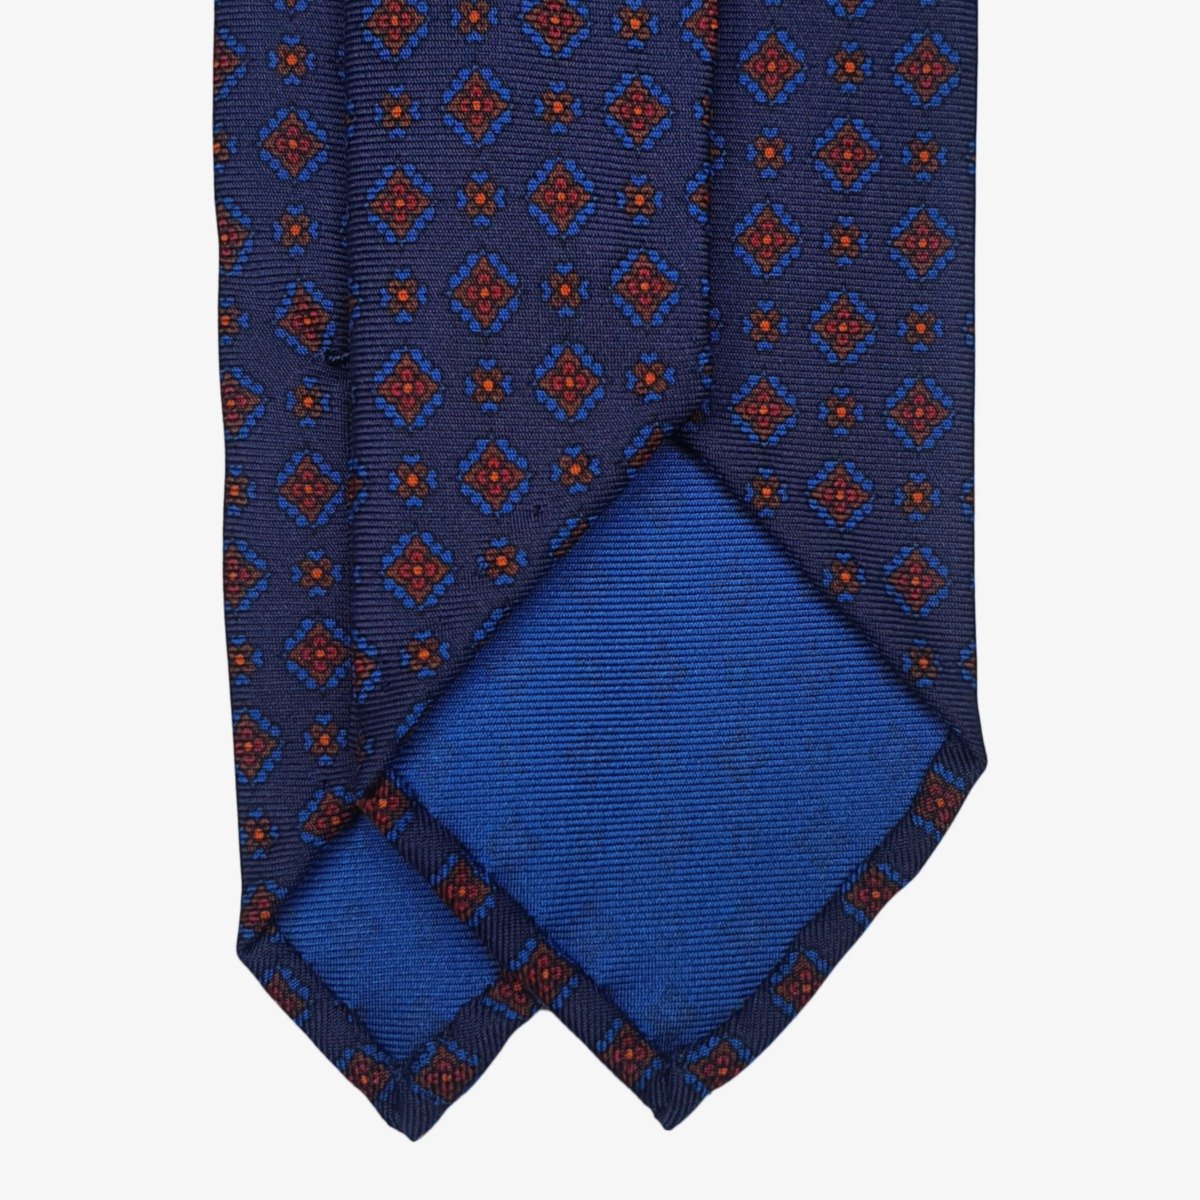 Shibumi Firenze navy ancient madder silk tie with floral pattern